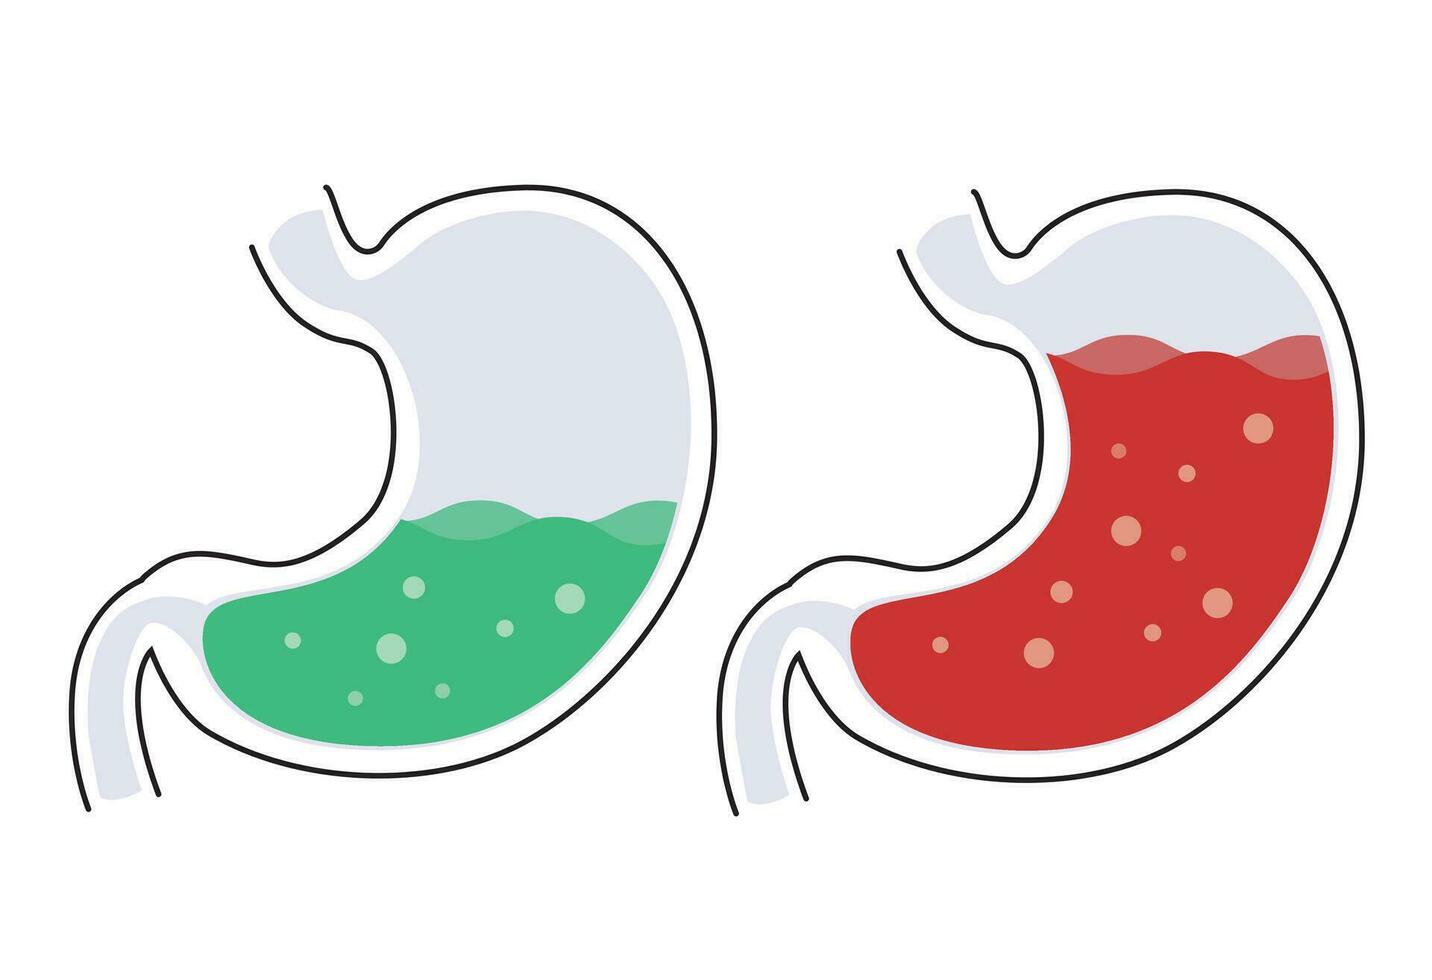 The stomach vector design is used in medicine and science to illustrate the human stomach and its functions.